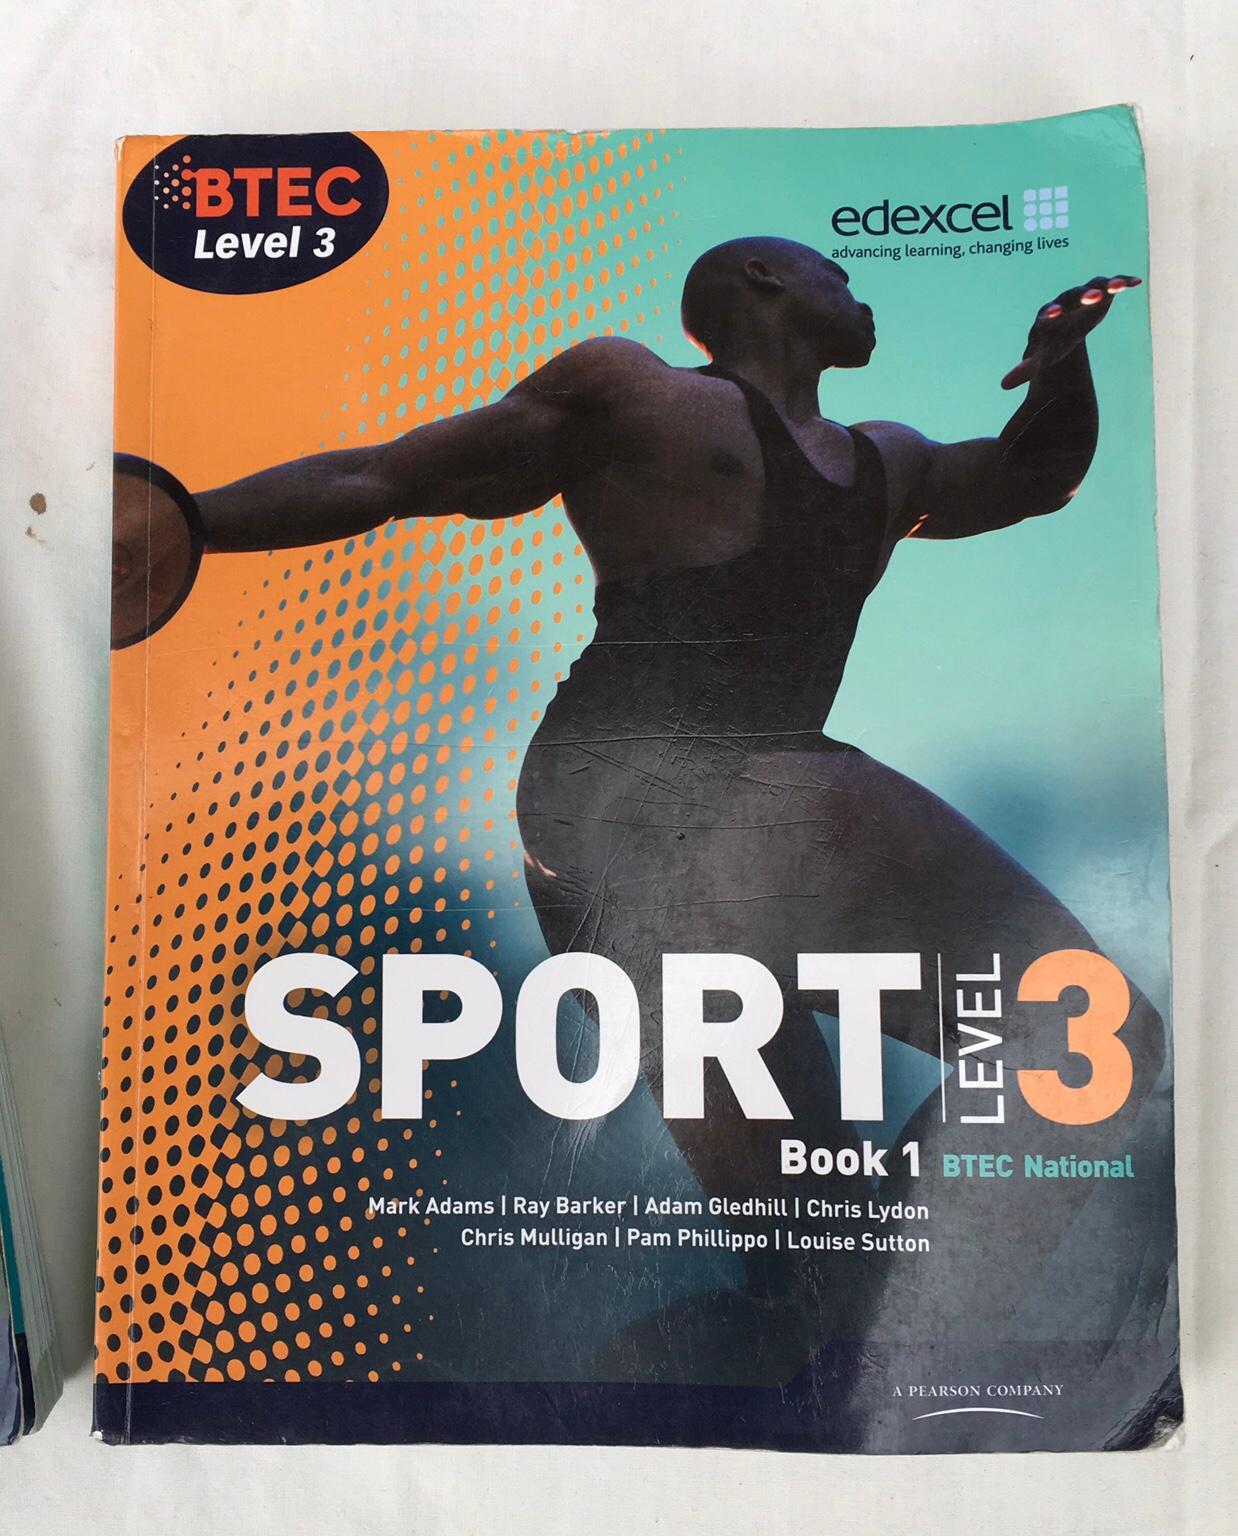 BTEC LEVEL 3 sports book 1&2 used in Fenland for £10.00 for sale | Shpock